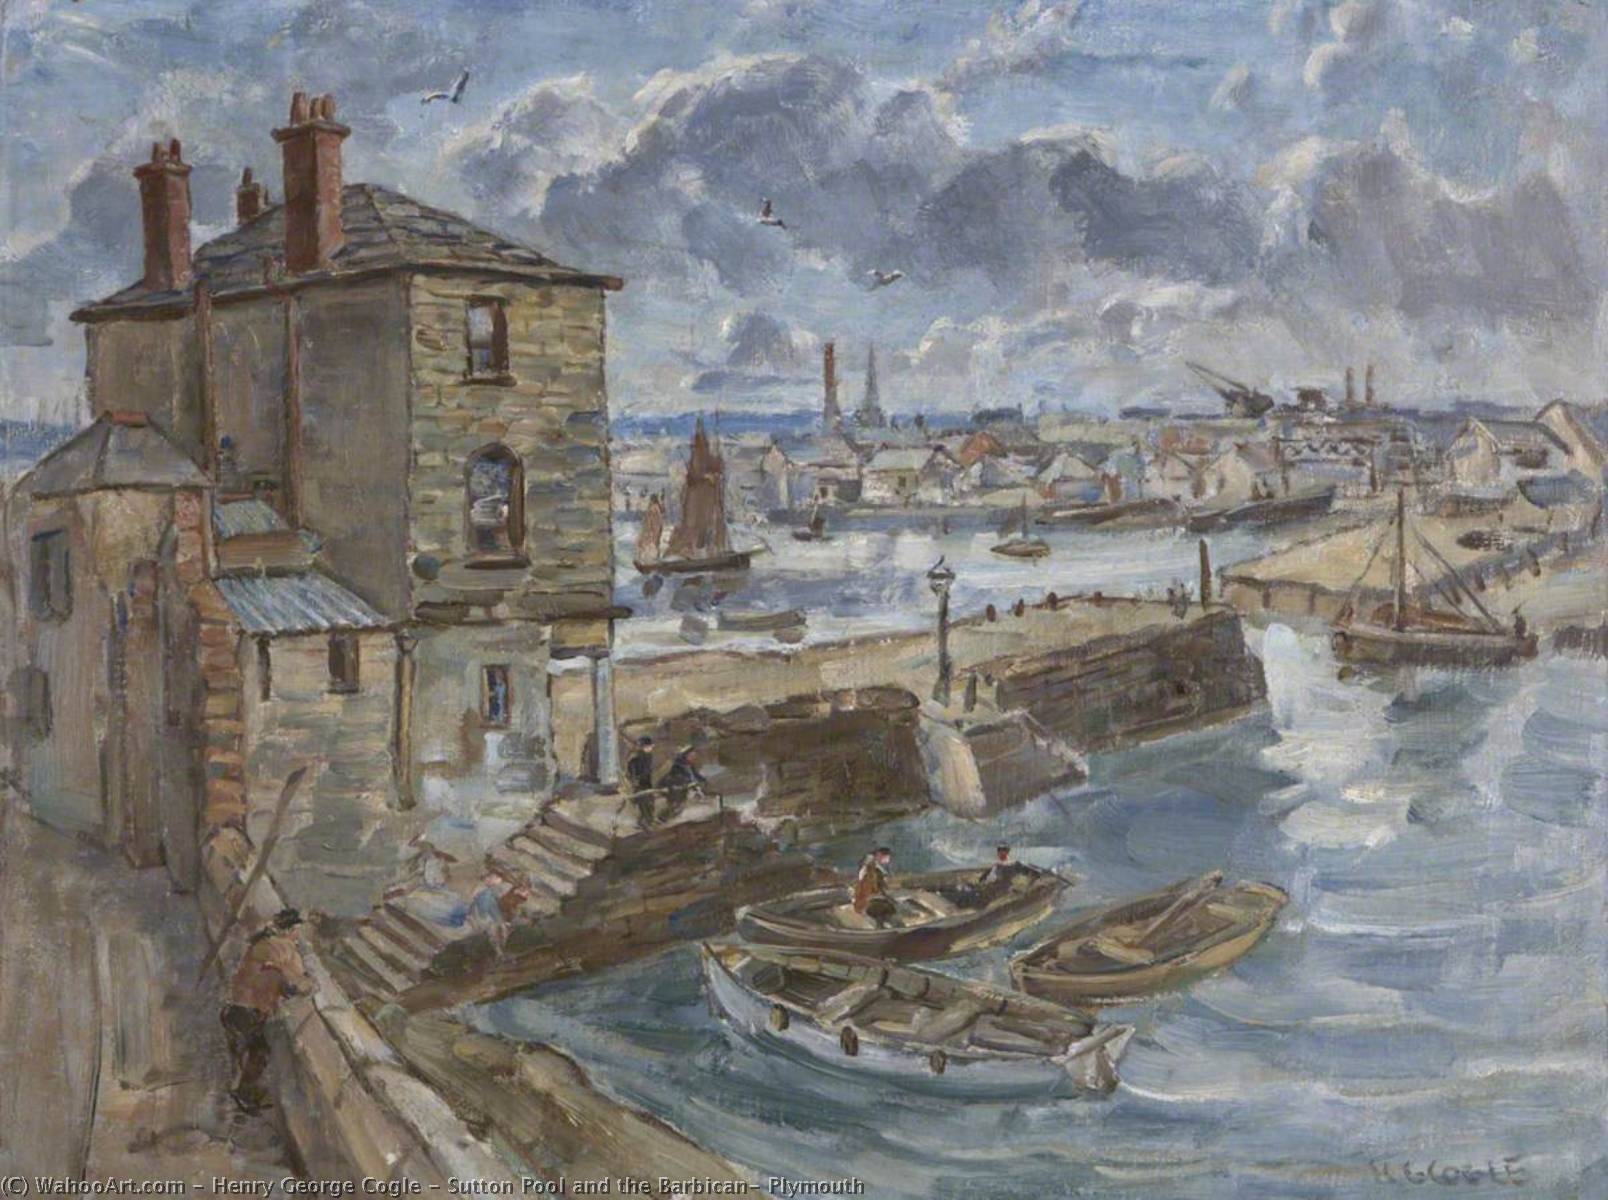 Sutton Pool and the Barbican, Plymouth by Henry George Cogle (1875-1957) Henry George Cogle | ArtsDot.com